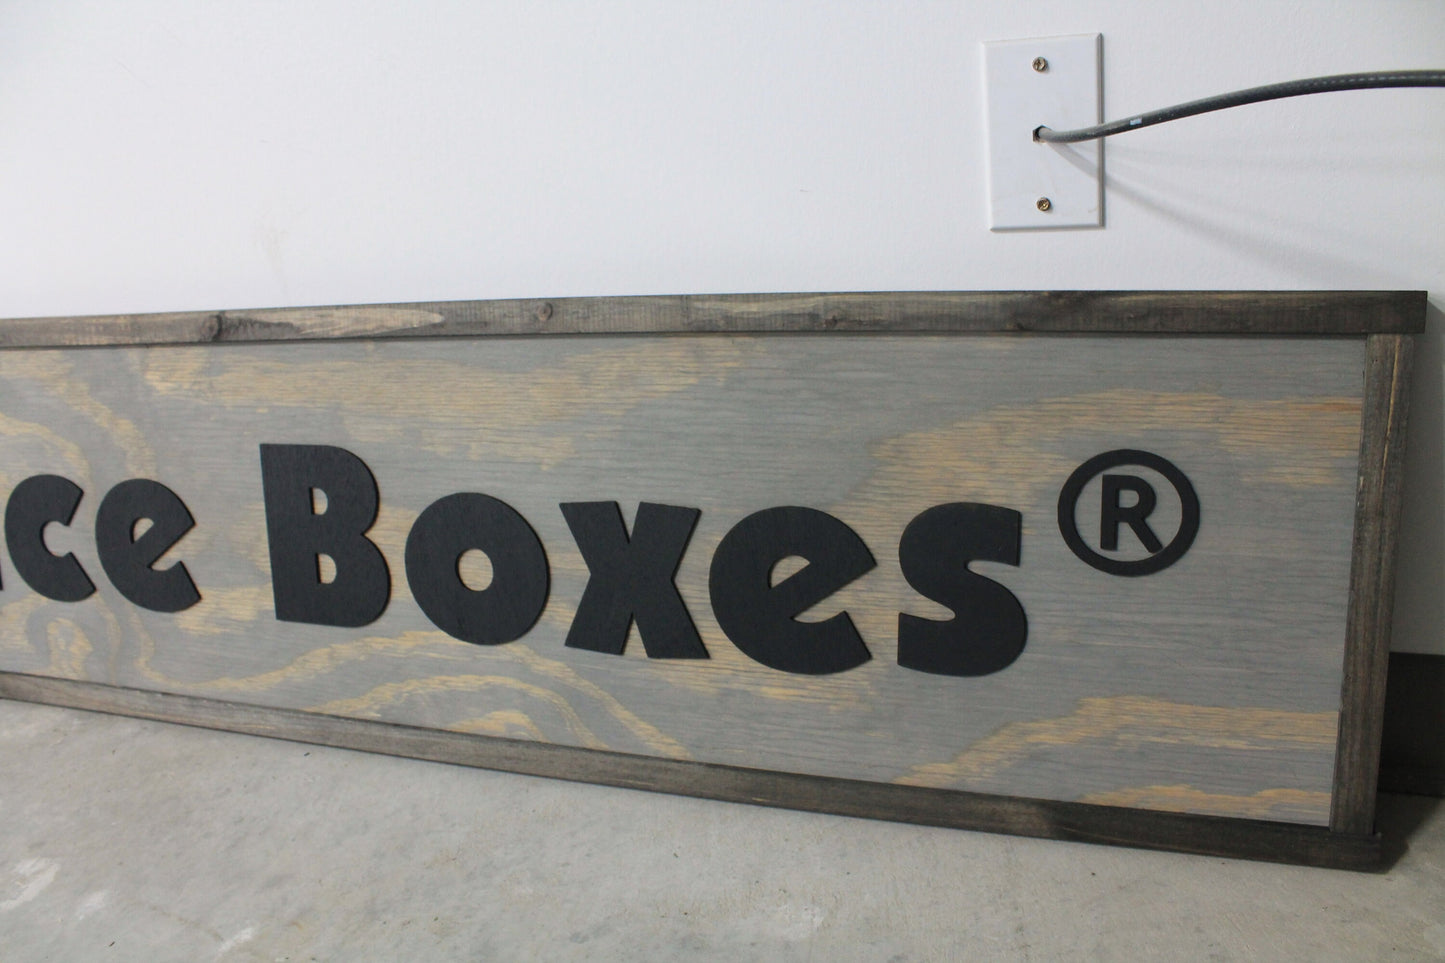 Commerical Business Signage Large Personalized Box Store Wooden 3D Raised Image Sign Business Logo Laser Cut Handmade